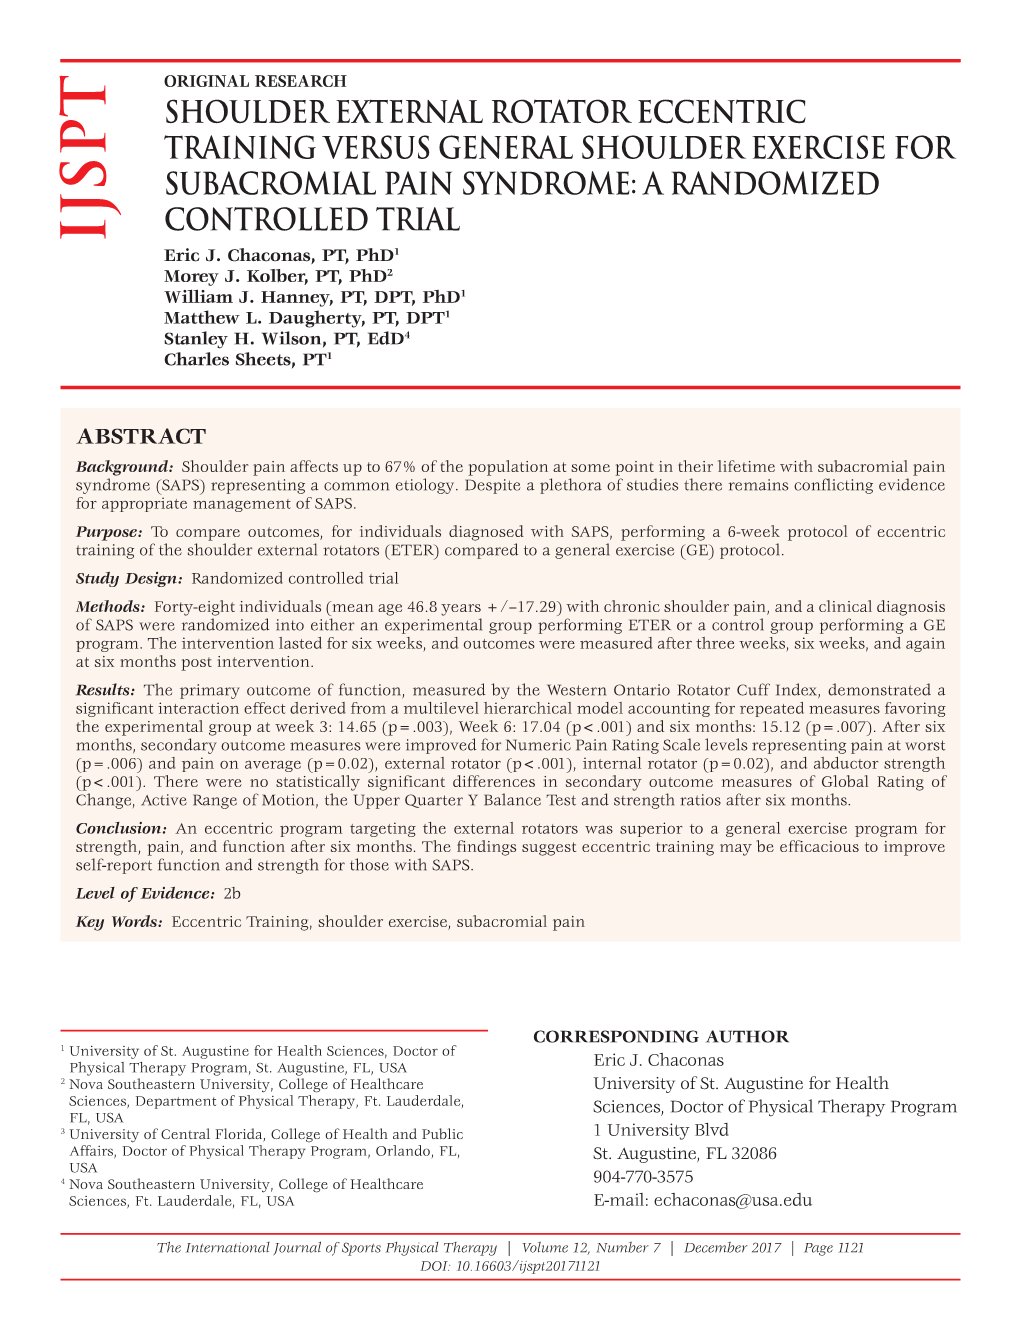 SHOULDER EXTERNAL ROTATOR ECCENTRIC TRAINING VERSUS GENERAL SHOULDER EXERCISE for SUBACROMIAL PAIN SYNDROME: a RANDOMIZED CONTROLLED TRIAL IJSPT Eric J